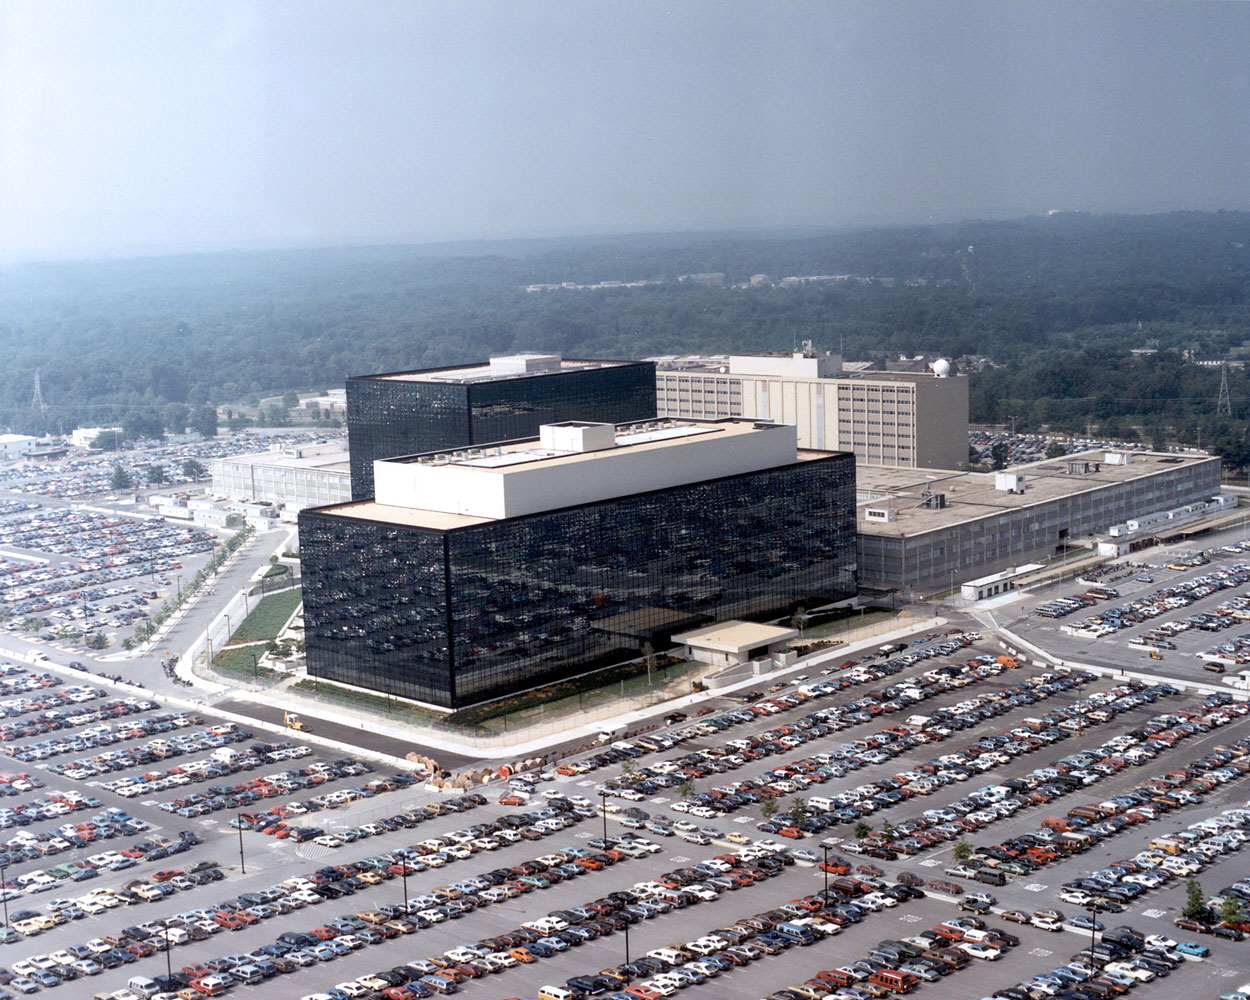 This undated photo provided by the National Security Agency (NSA) shows its headquarters in Fort Meade, Md. (NSA/Getty Images)